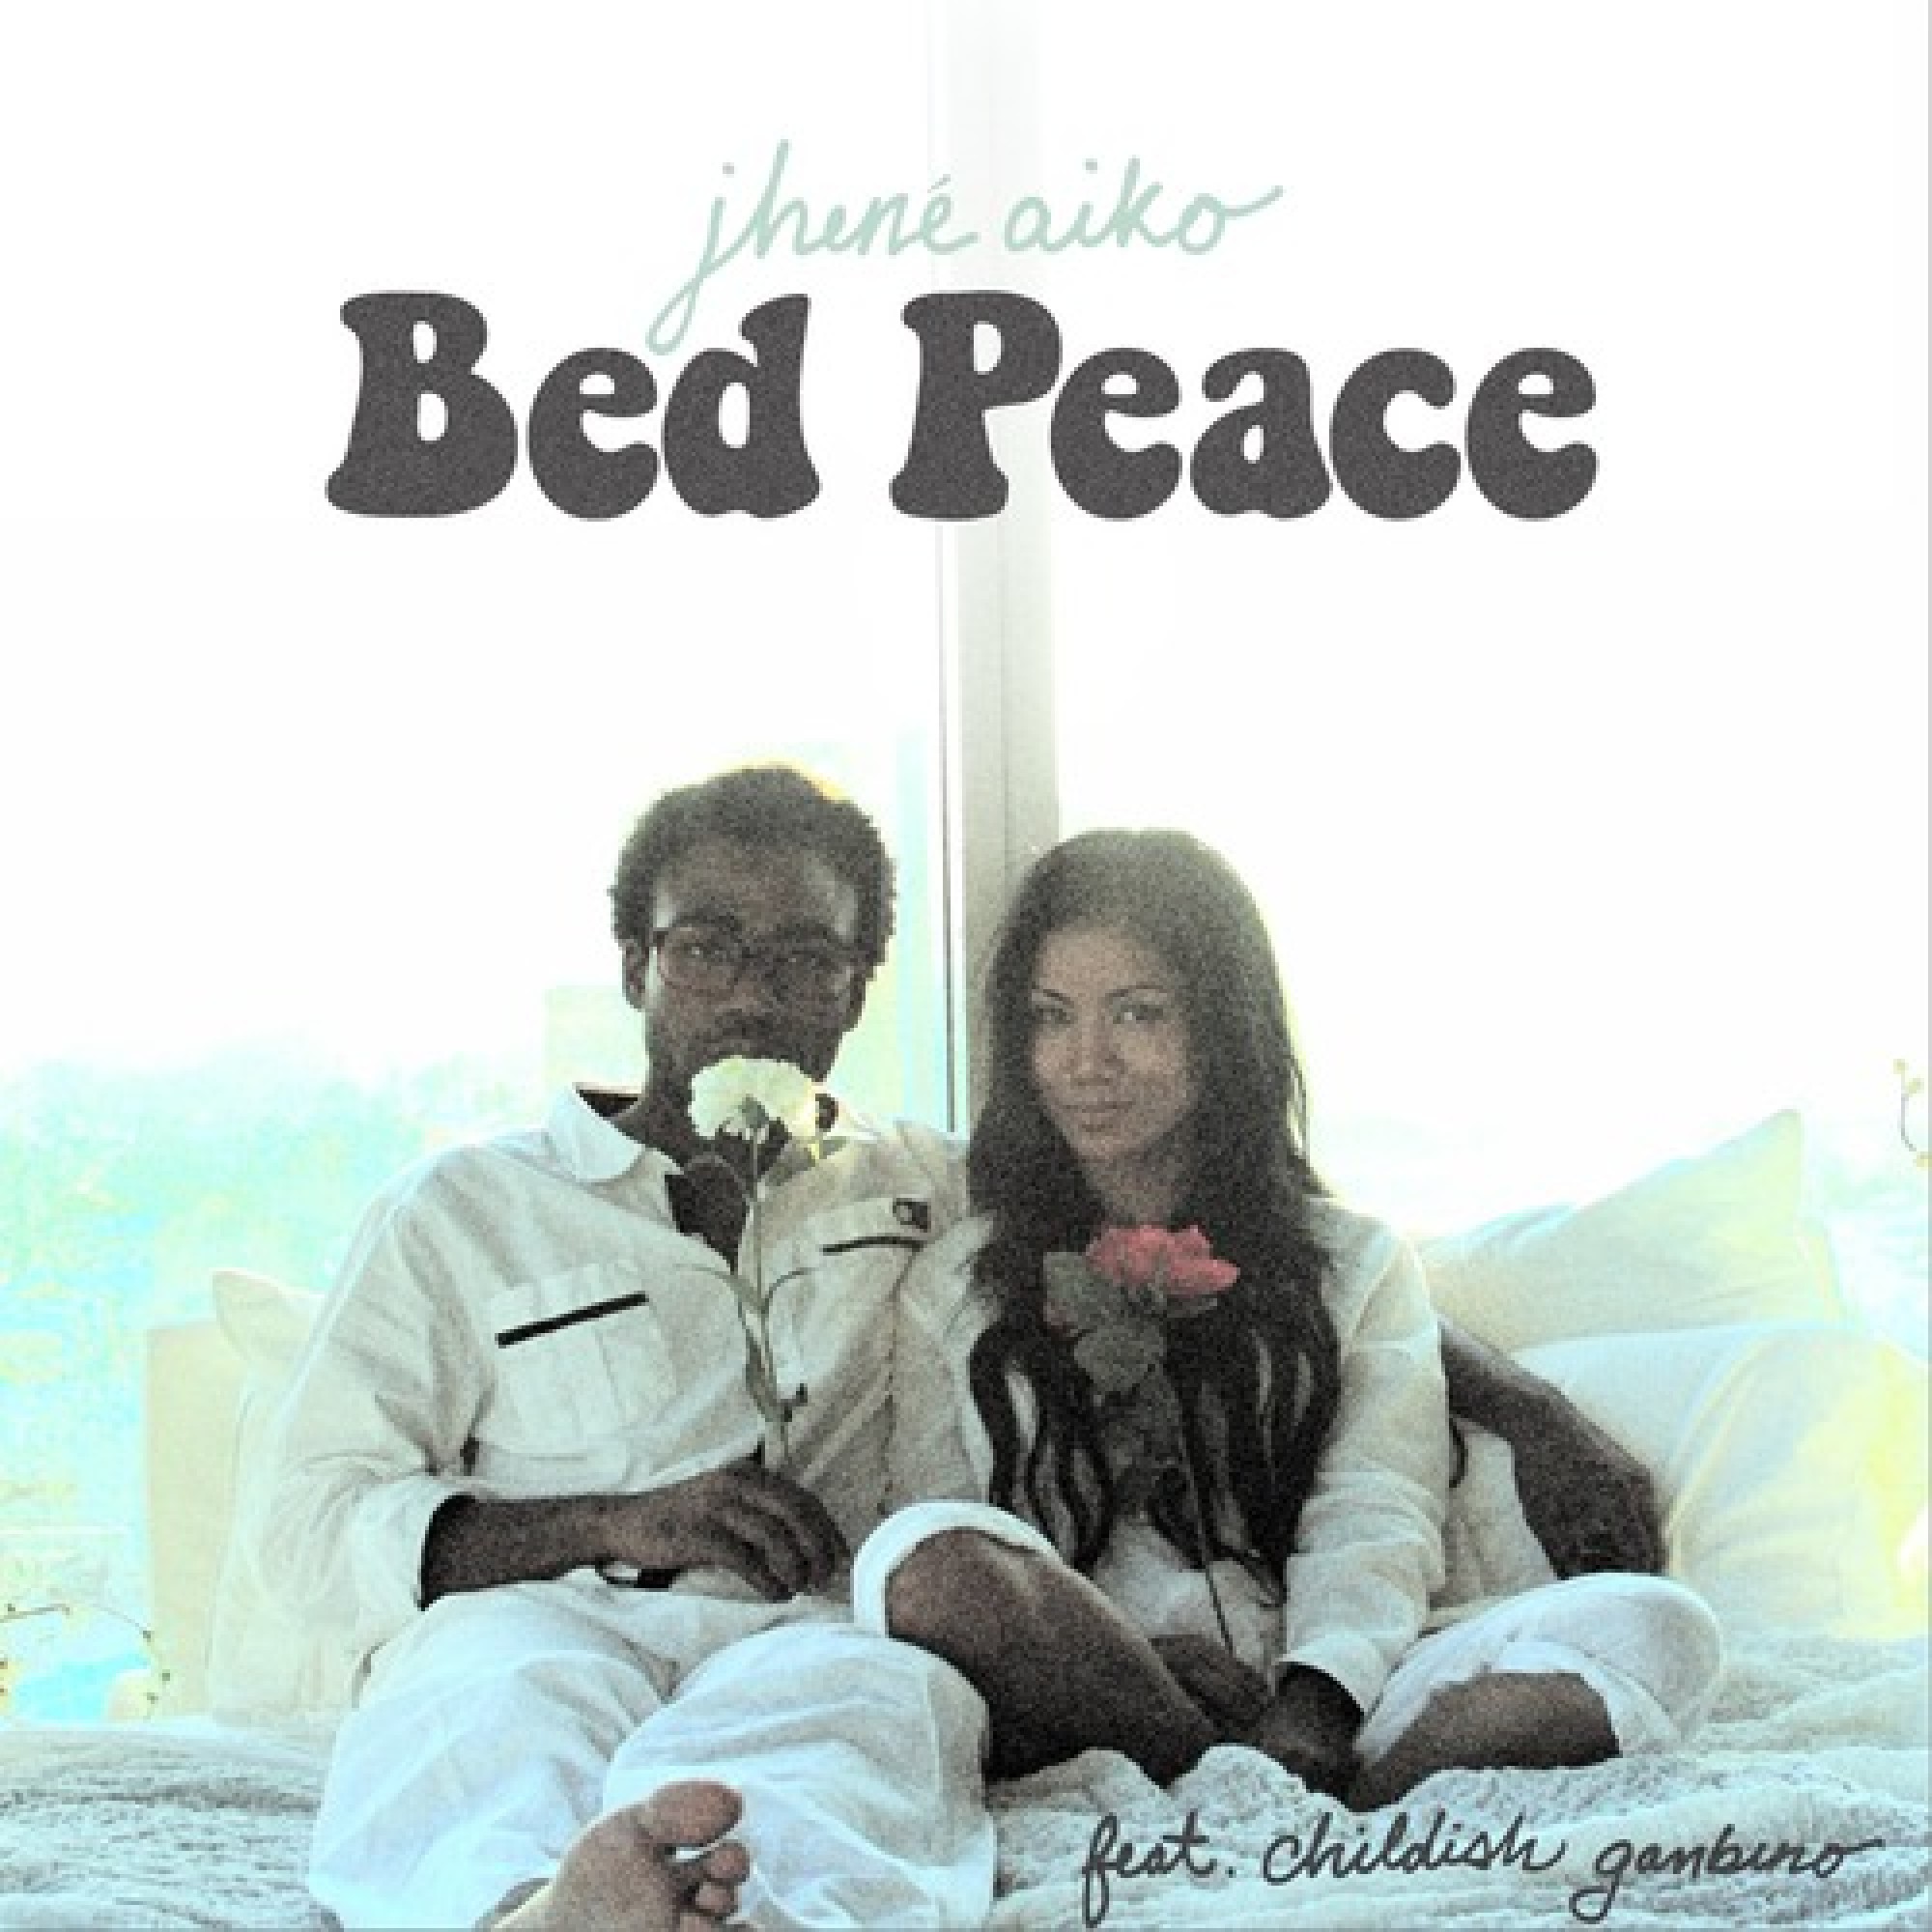 Jhene Aiko's 'Bed Peace' Sees Emerging Standout Teaming Up With